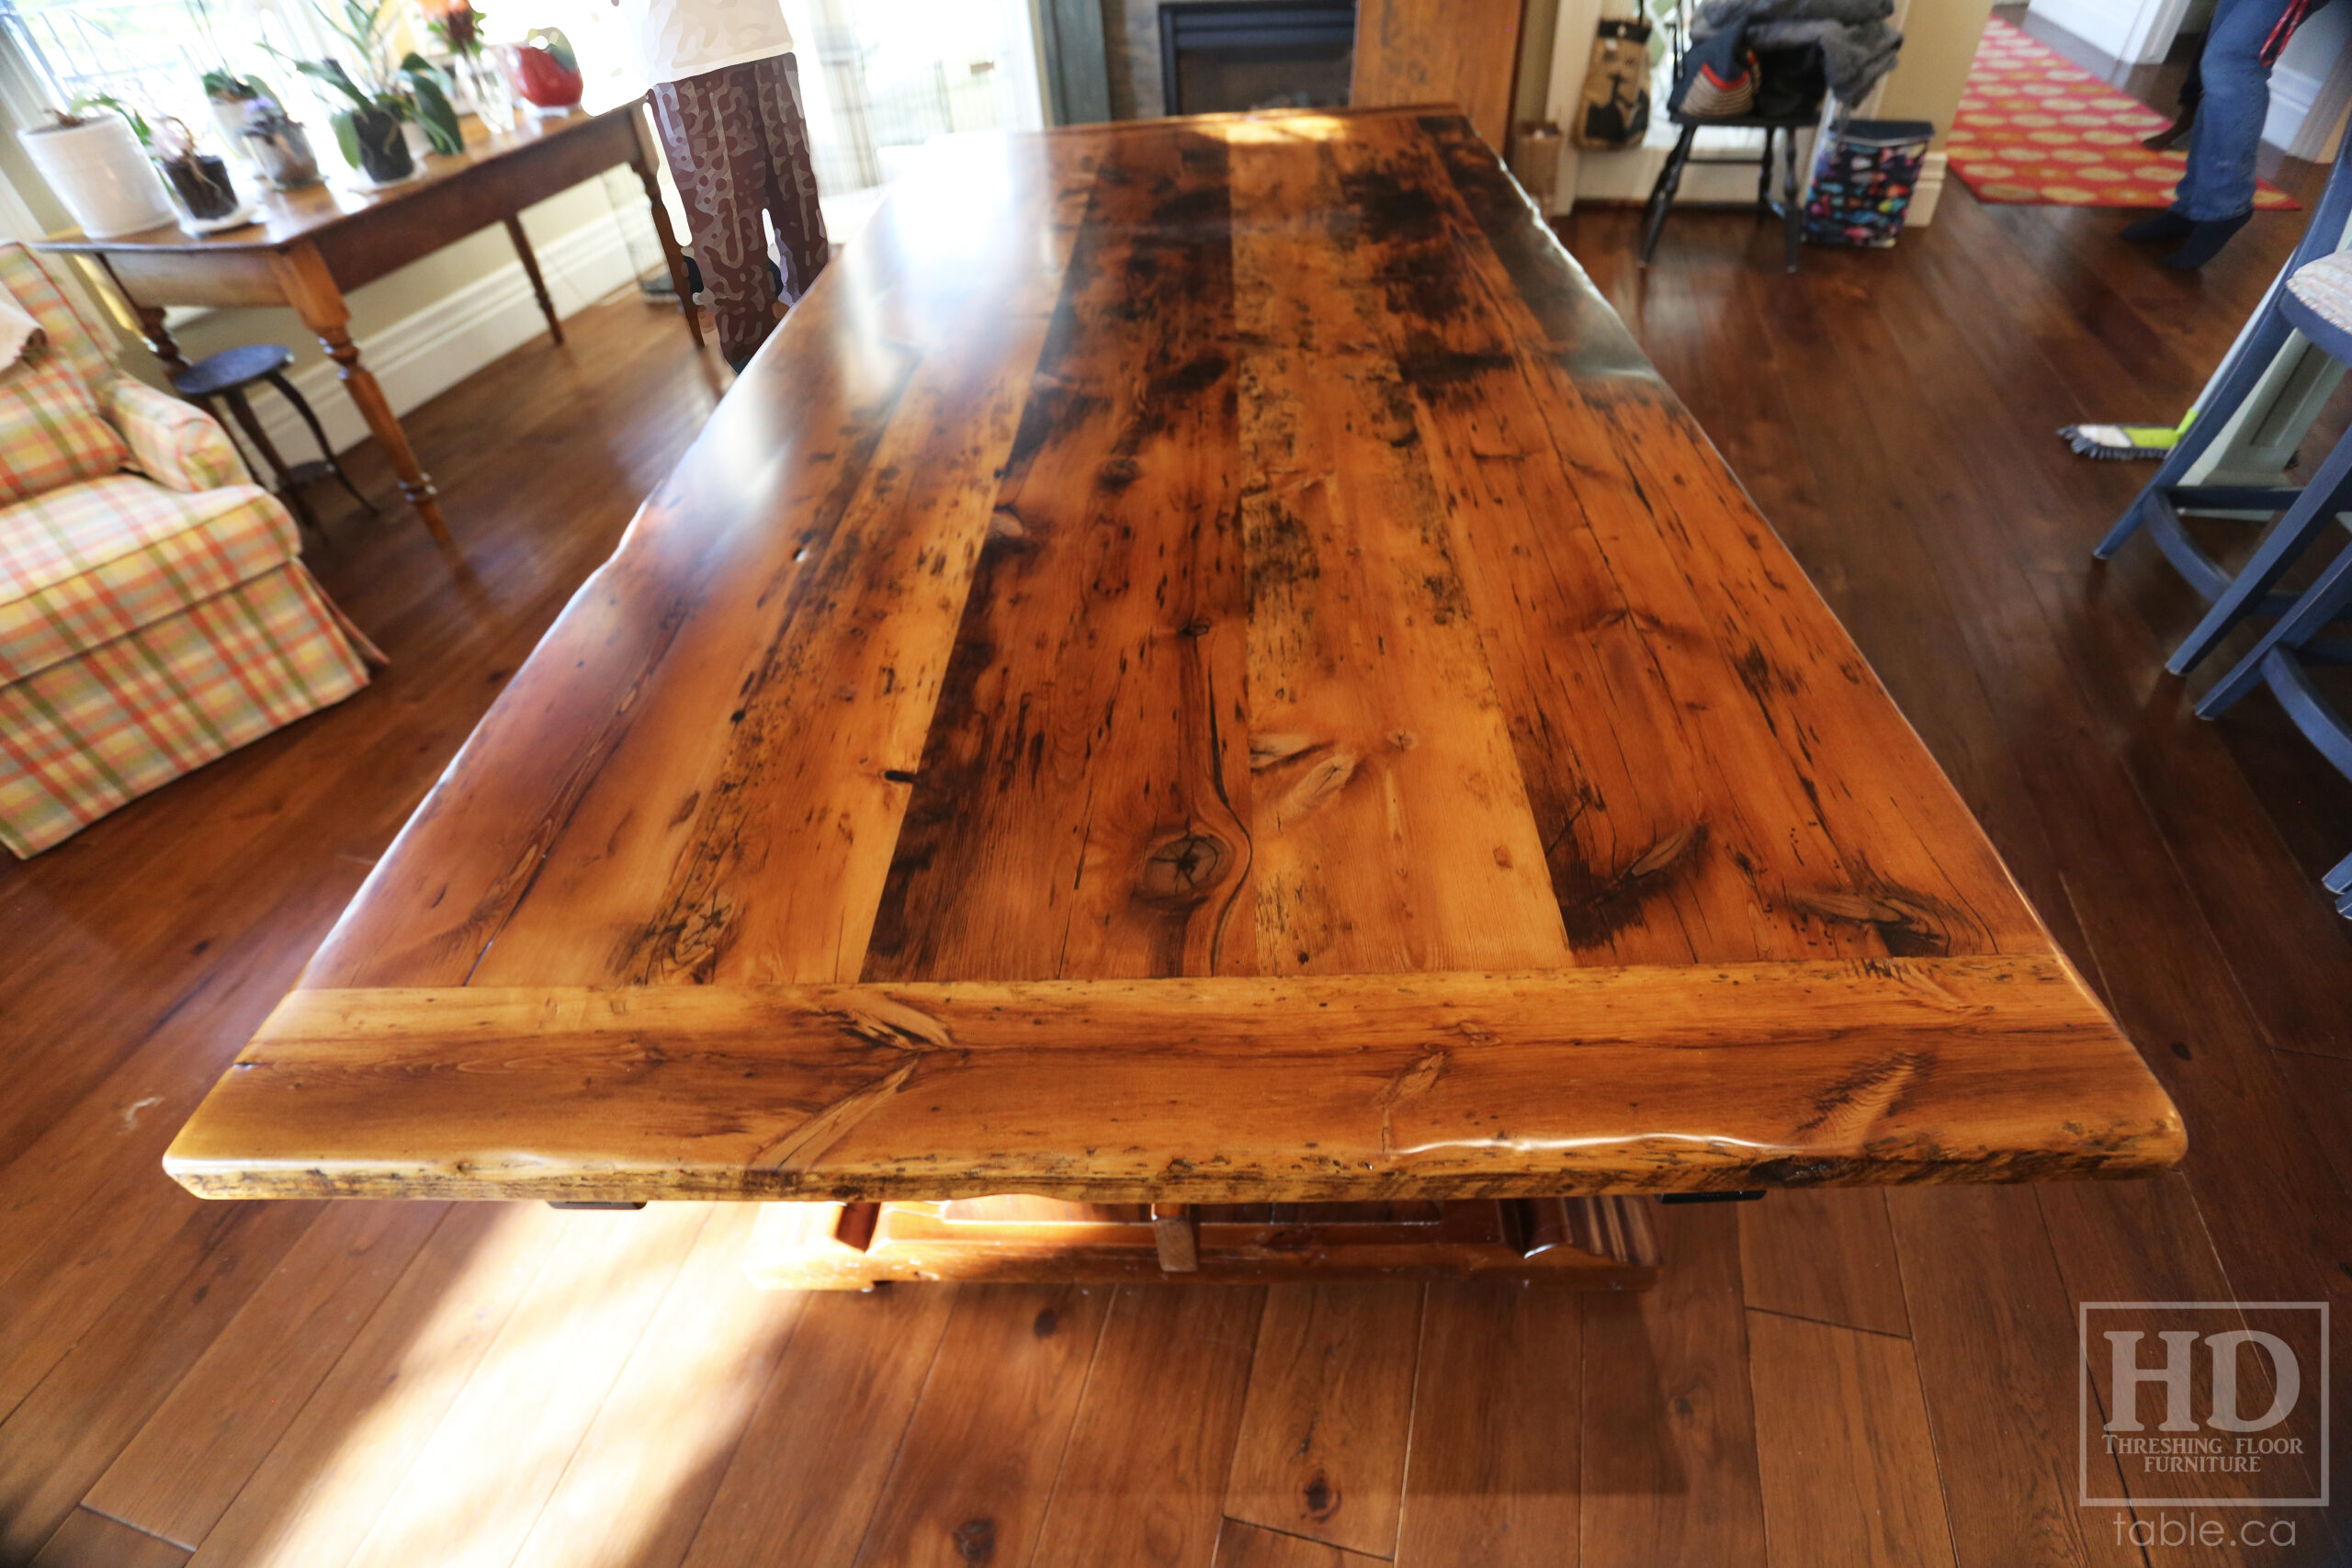 8' Ontario Barnwood Table we made for a Puslinch, Ontario home - 42" wide - Trestle Base [Violin shaped profile option] - Old Growth Hemlock Threshing Floor Construction - Original edges & distressing maintained - Premium epoxy + satin polyurethane finish - Two 18" Leaves - www.table.ca